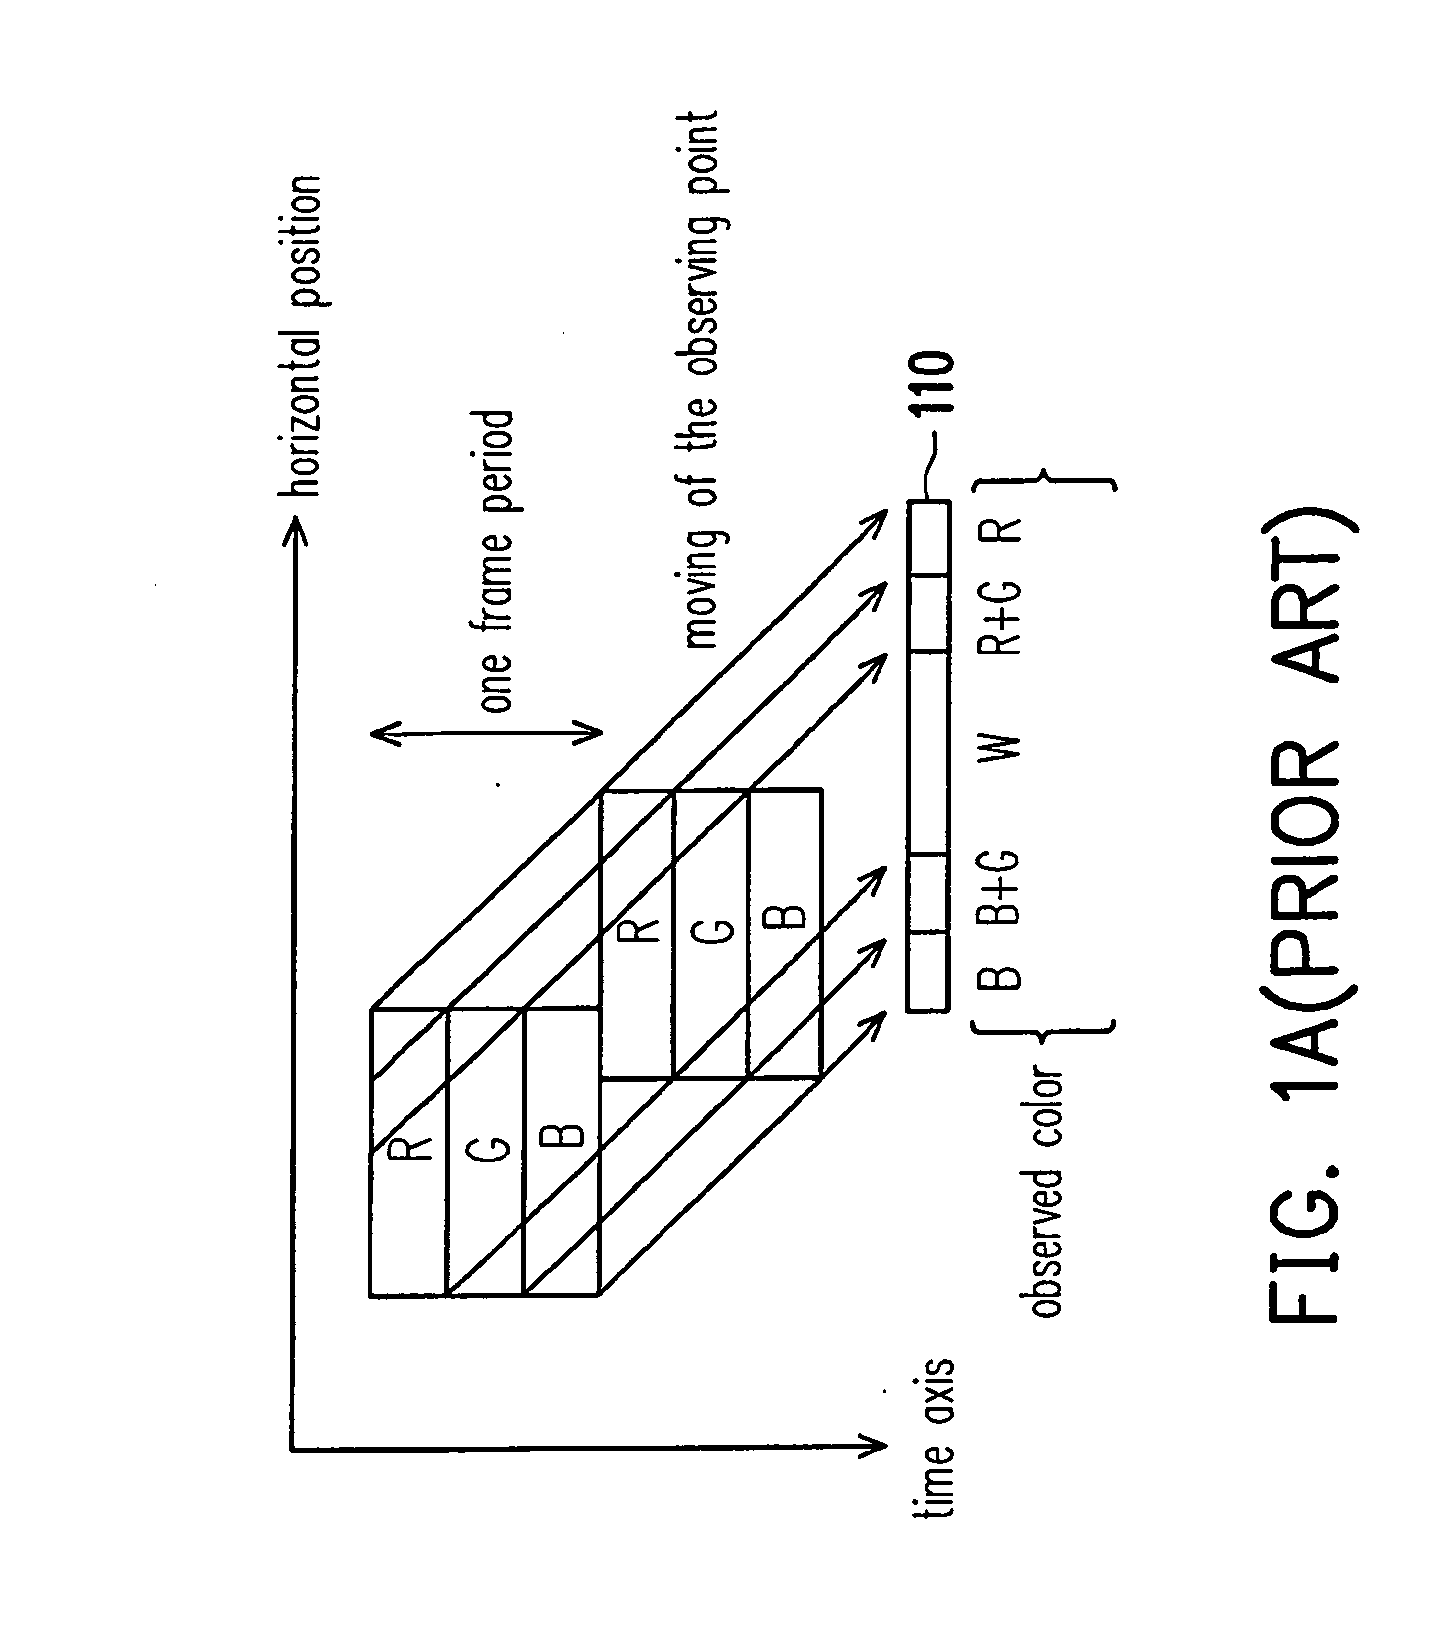 Method for driving a display